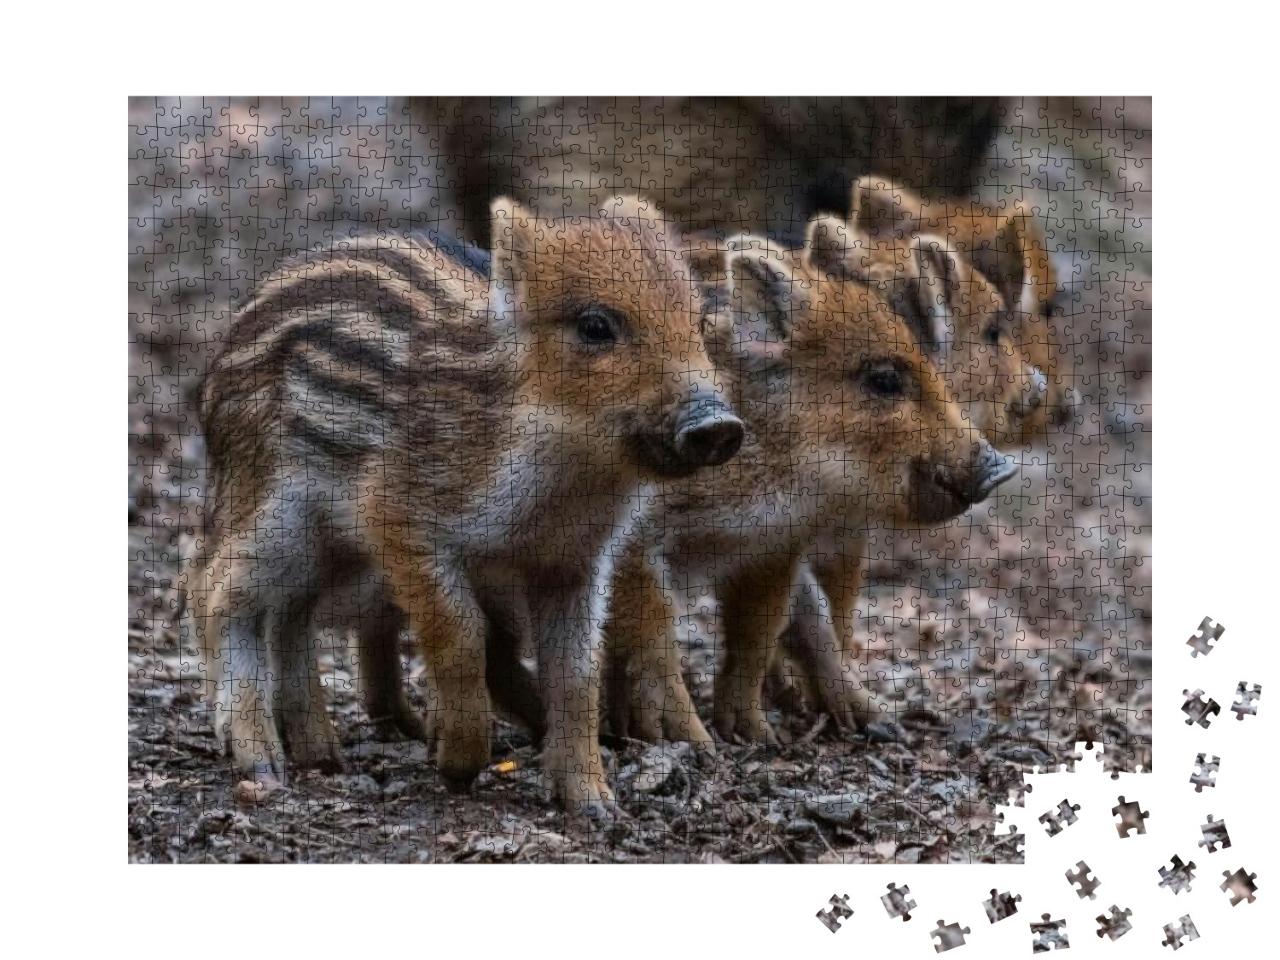 4 Cute Piglets Strung Together. Baby Pigs in Cute Posture... Jigsaw Puzzle with 1000 pieces